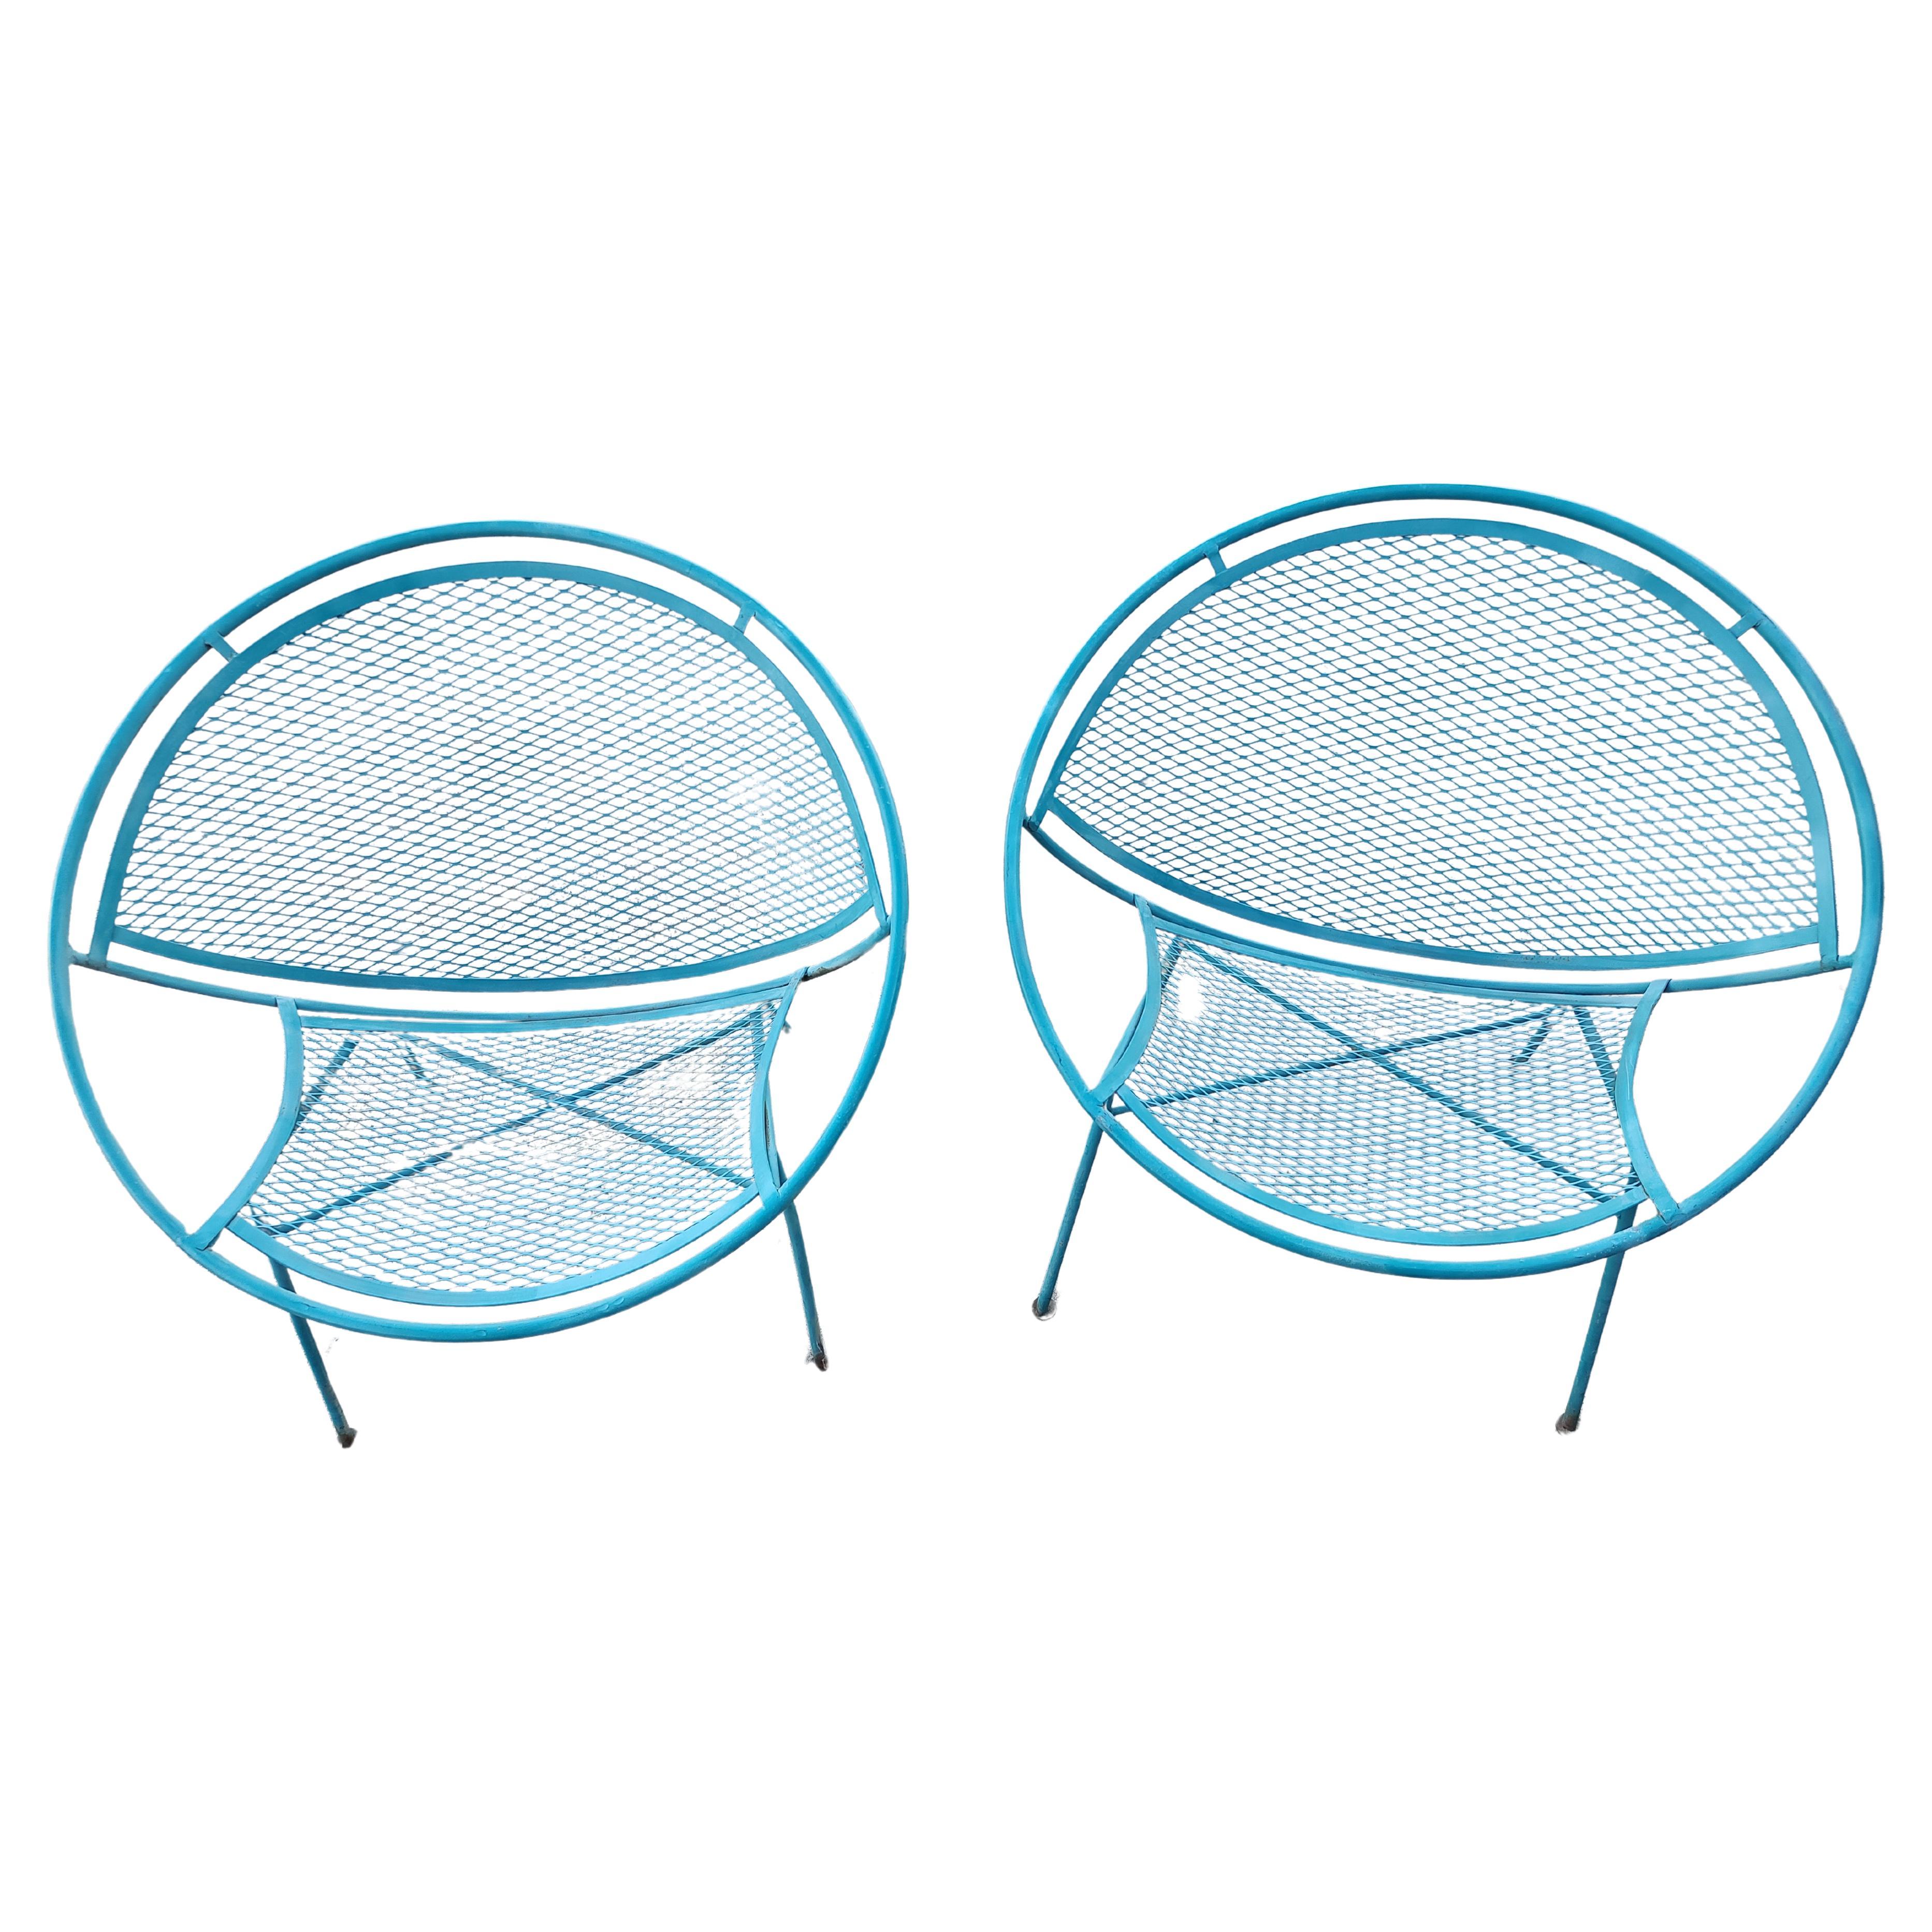 Fabulous mid century modern design mid fifties by Maurizio Tempestini, his radar chairs are immediately recognized and highly sought after. Sets of 2, two pair available, priced and sold as a pair. In excellent vintage condition, just old turquoise